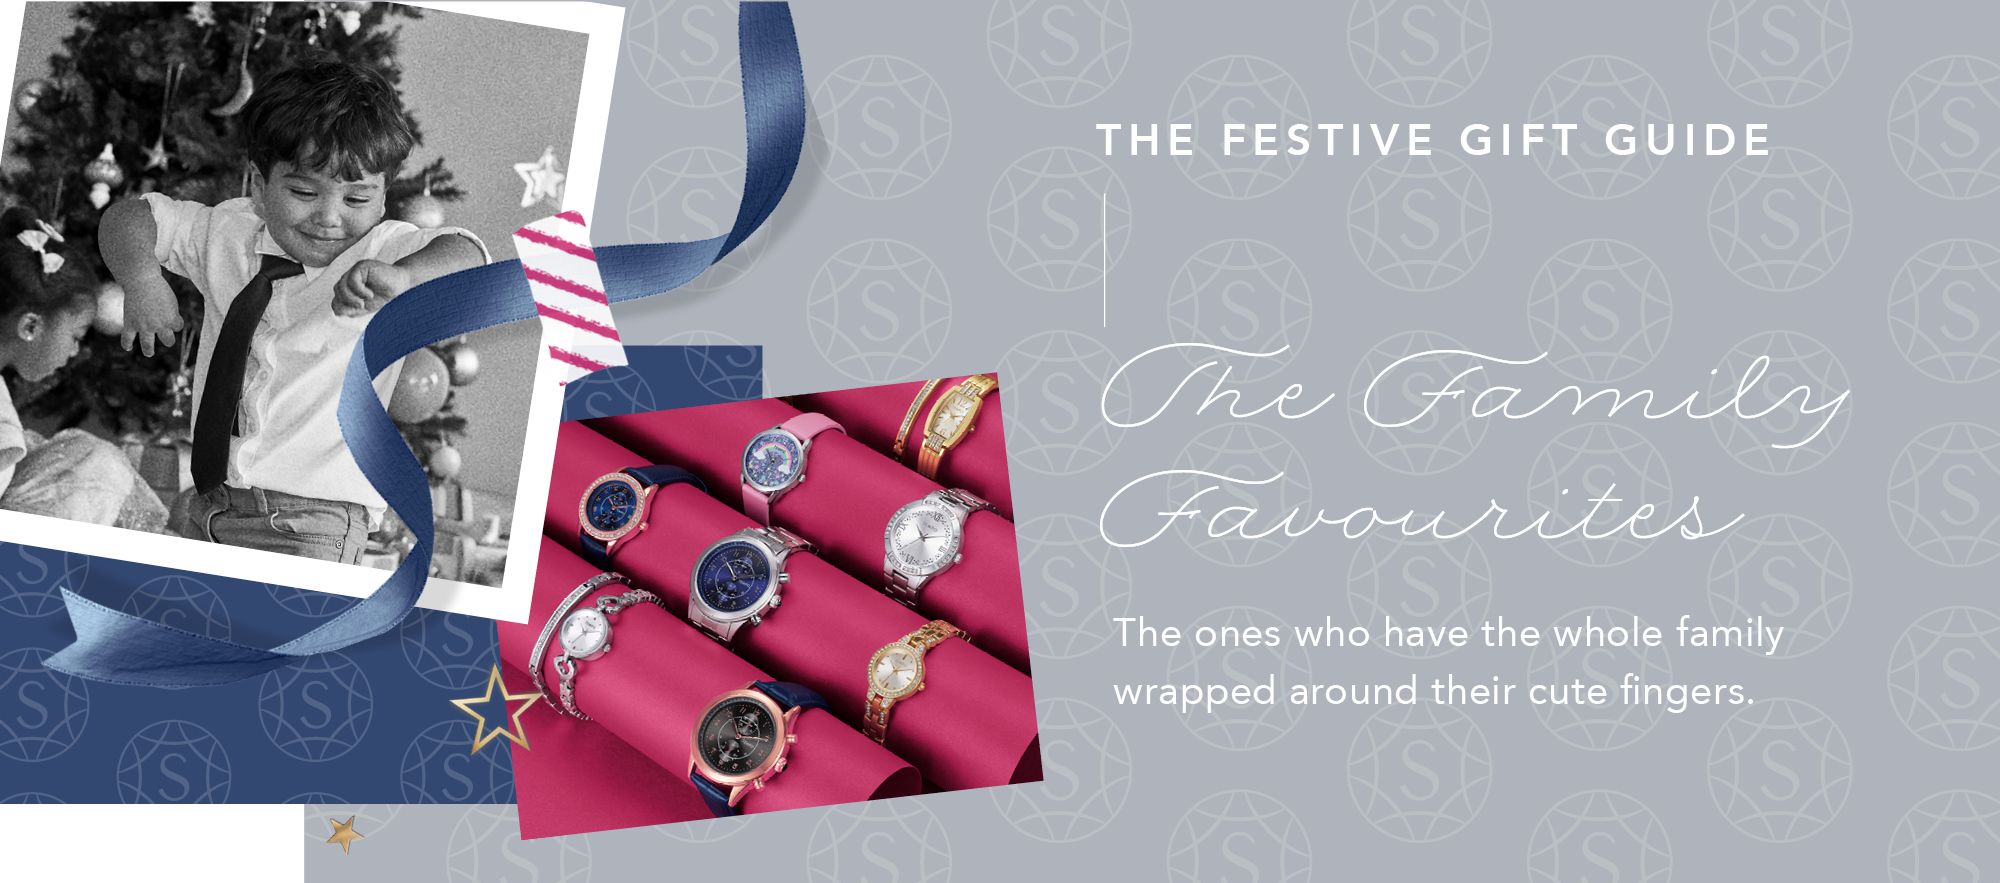 THE FESTIVE GIFT GUIDE The Family Favourites